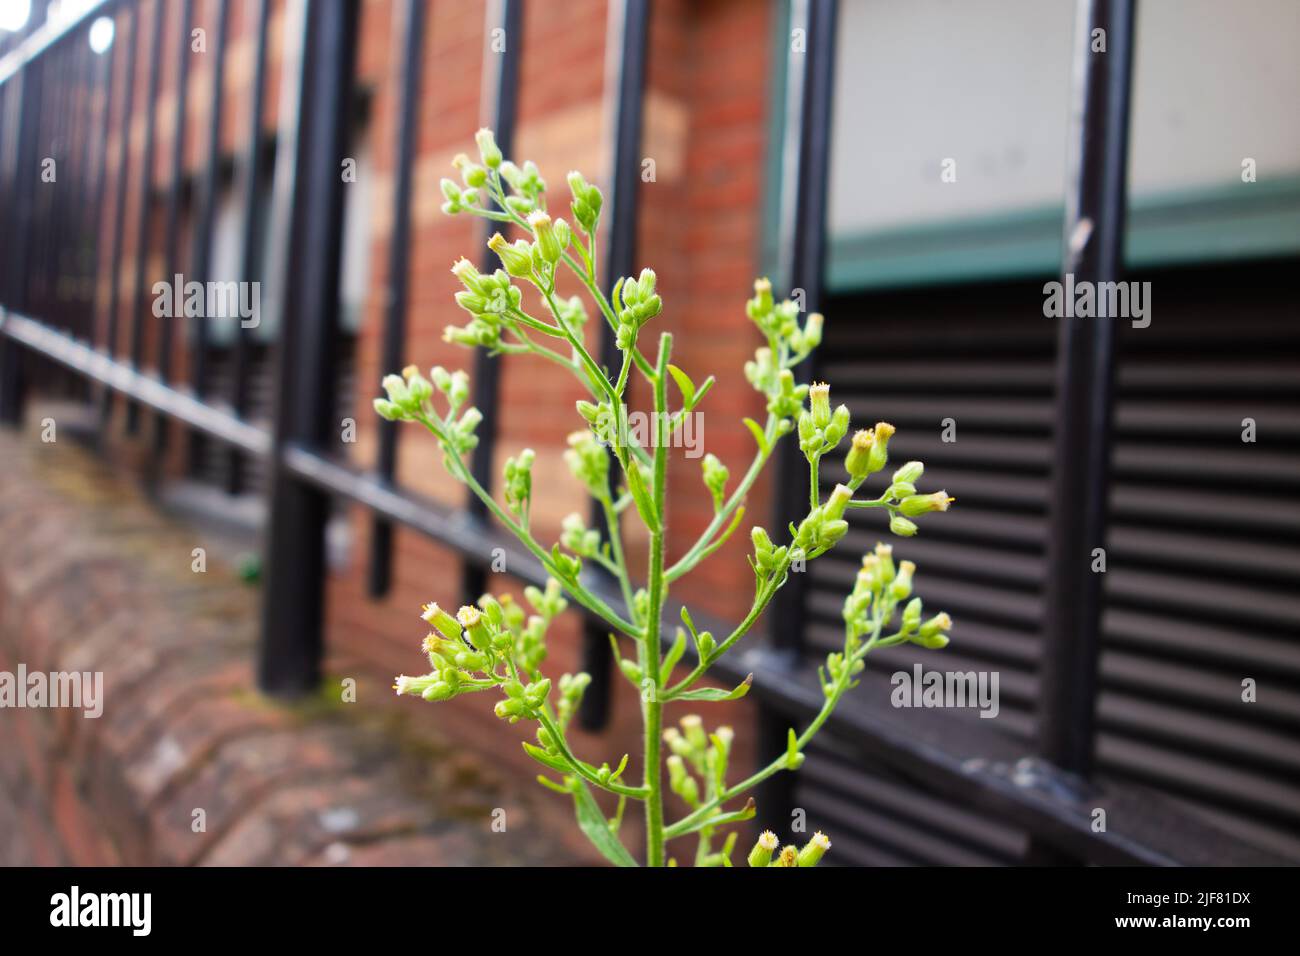 weed growing in the wall with black railings and a building in the background Stock Photo